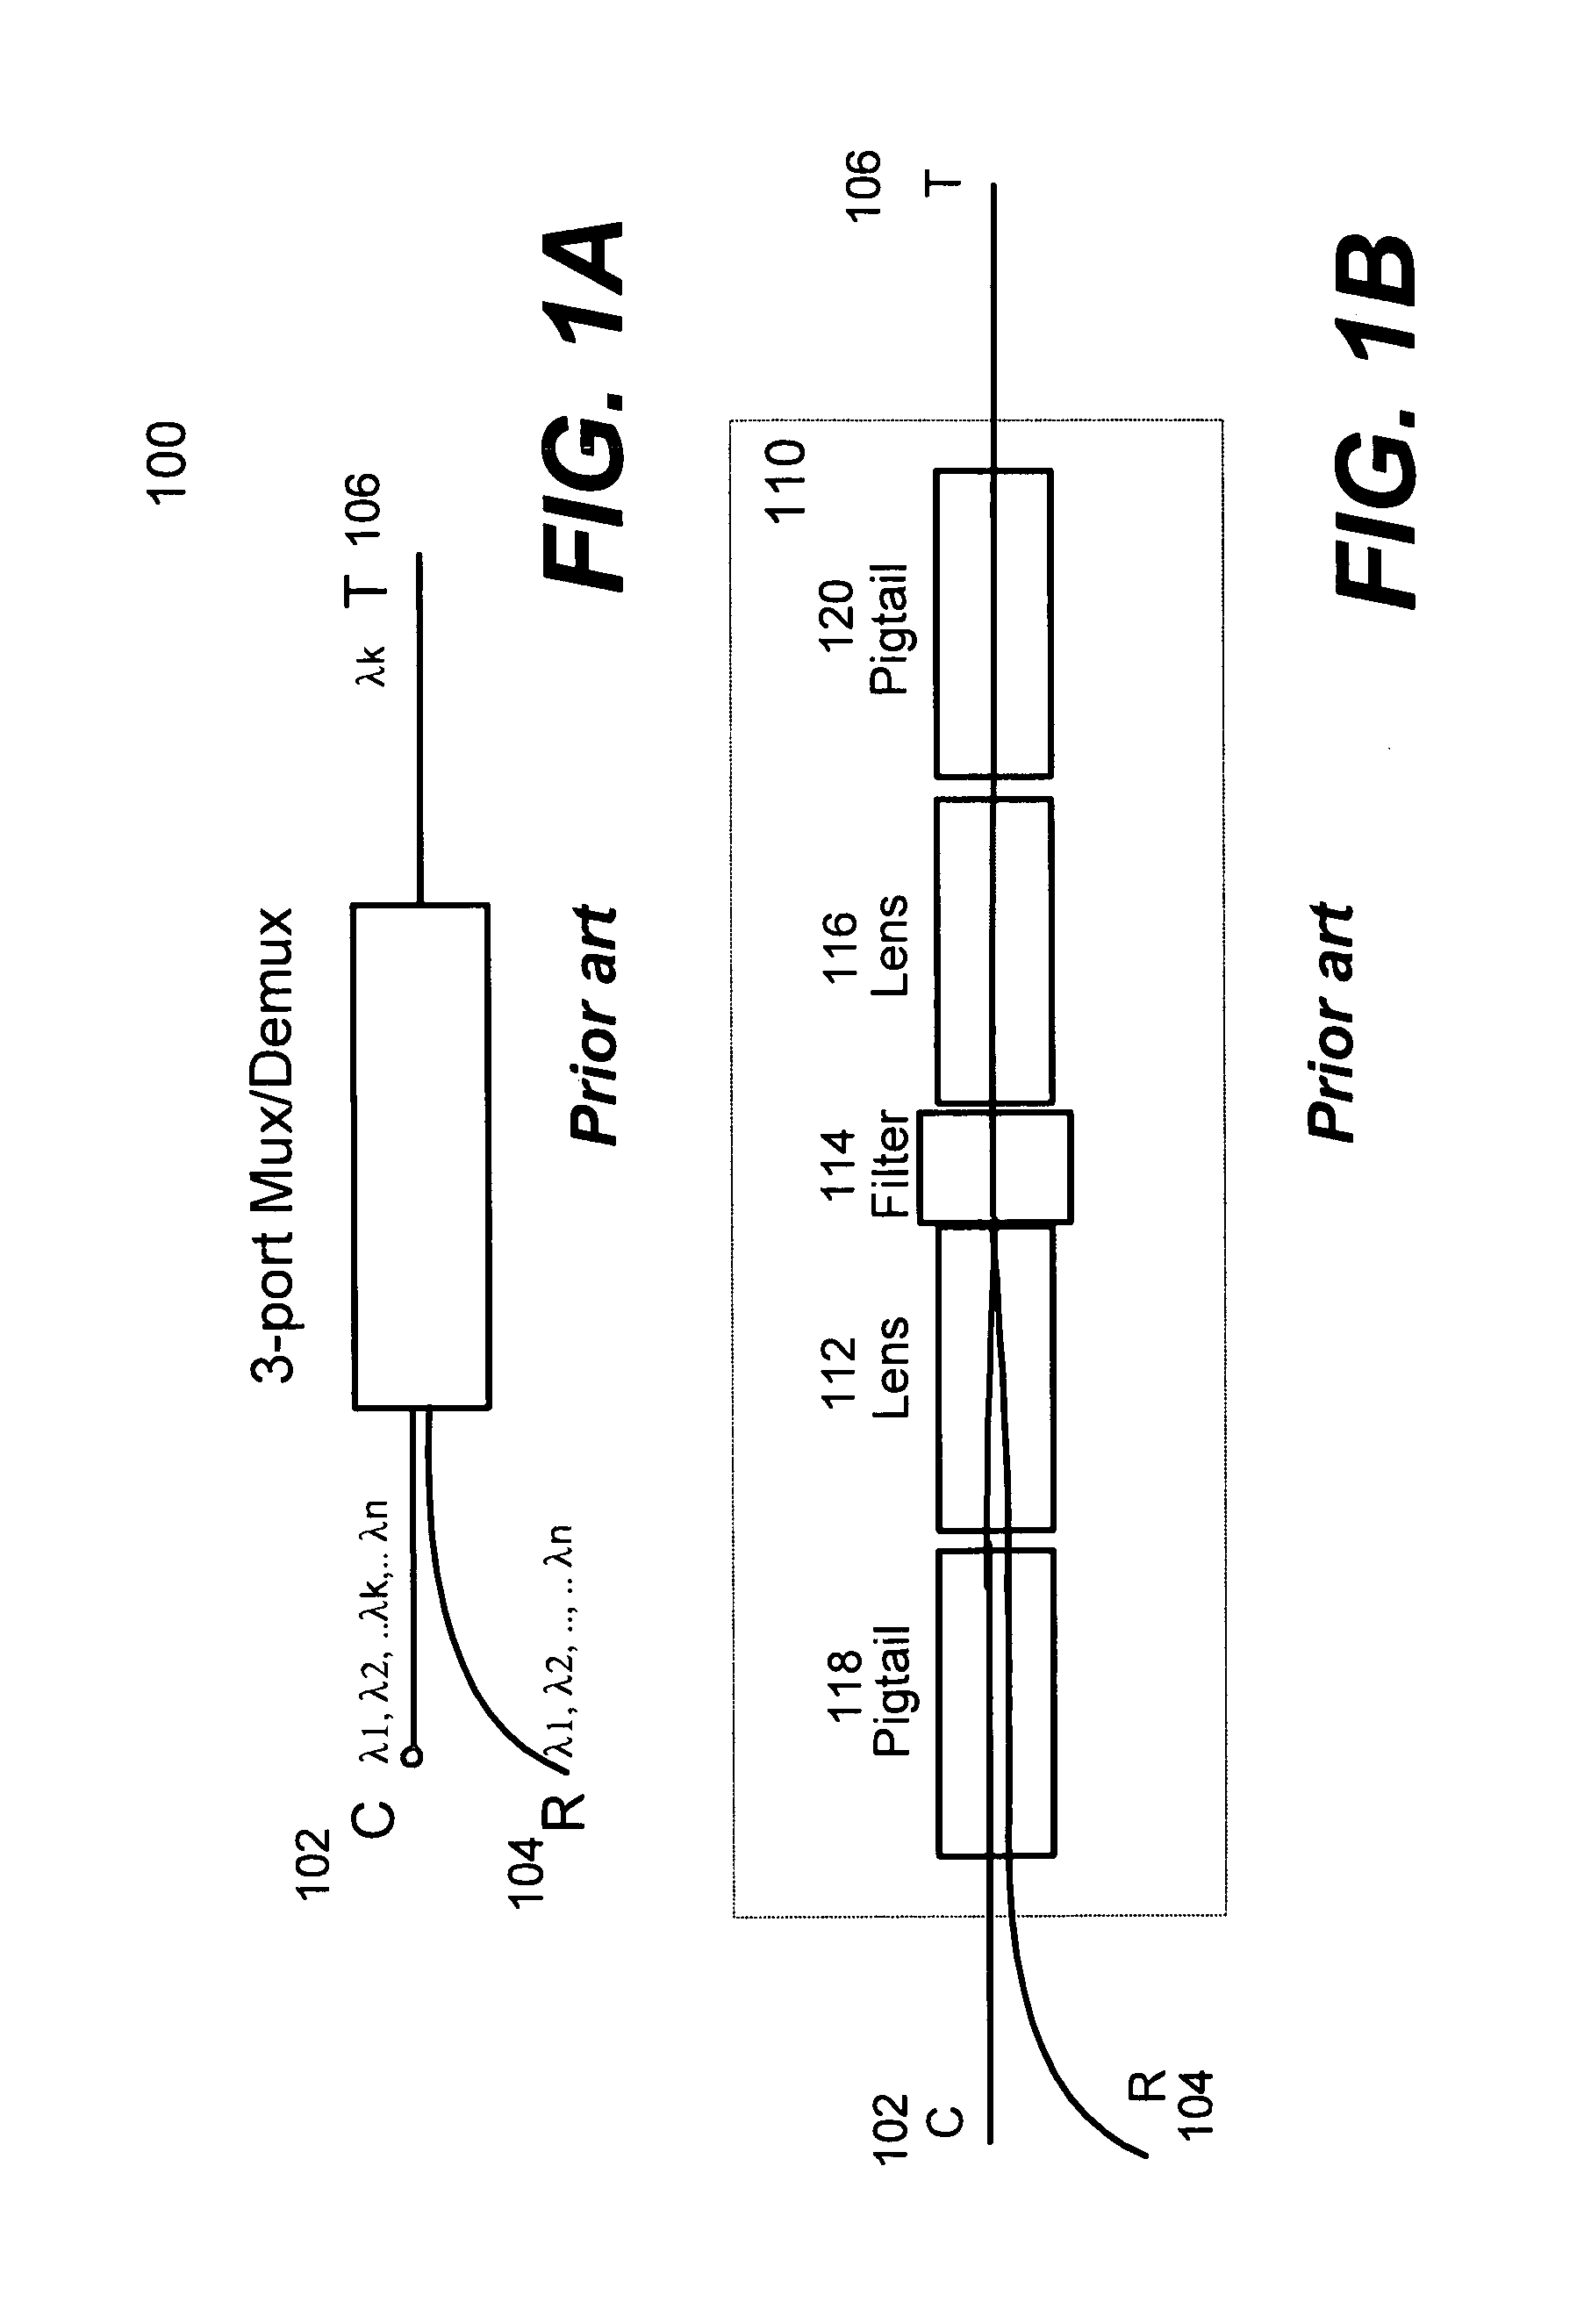 Multi-port high isolation filters